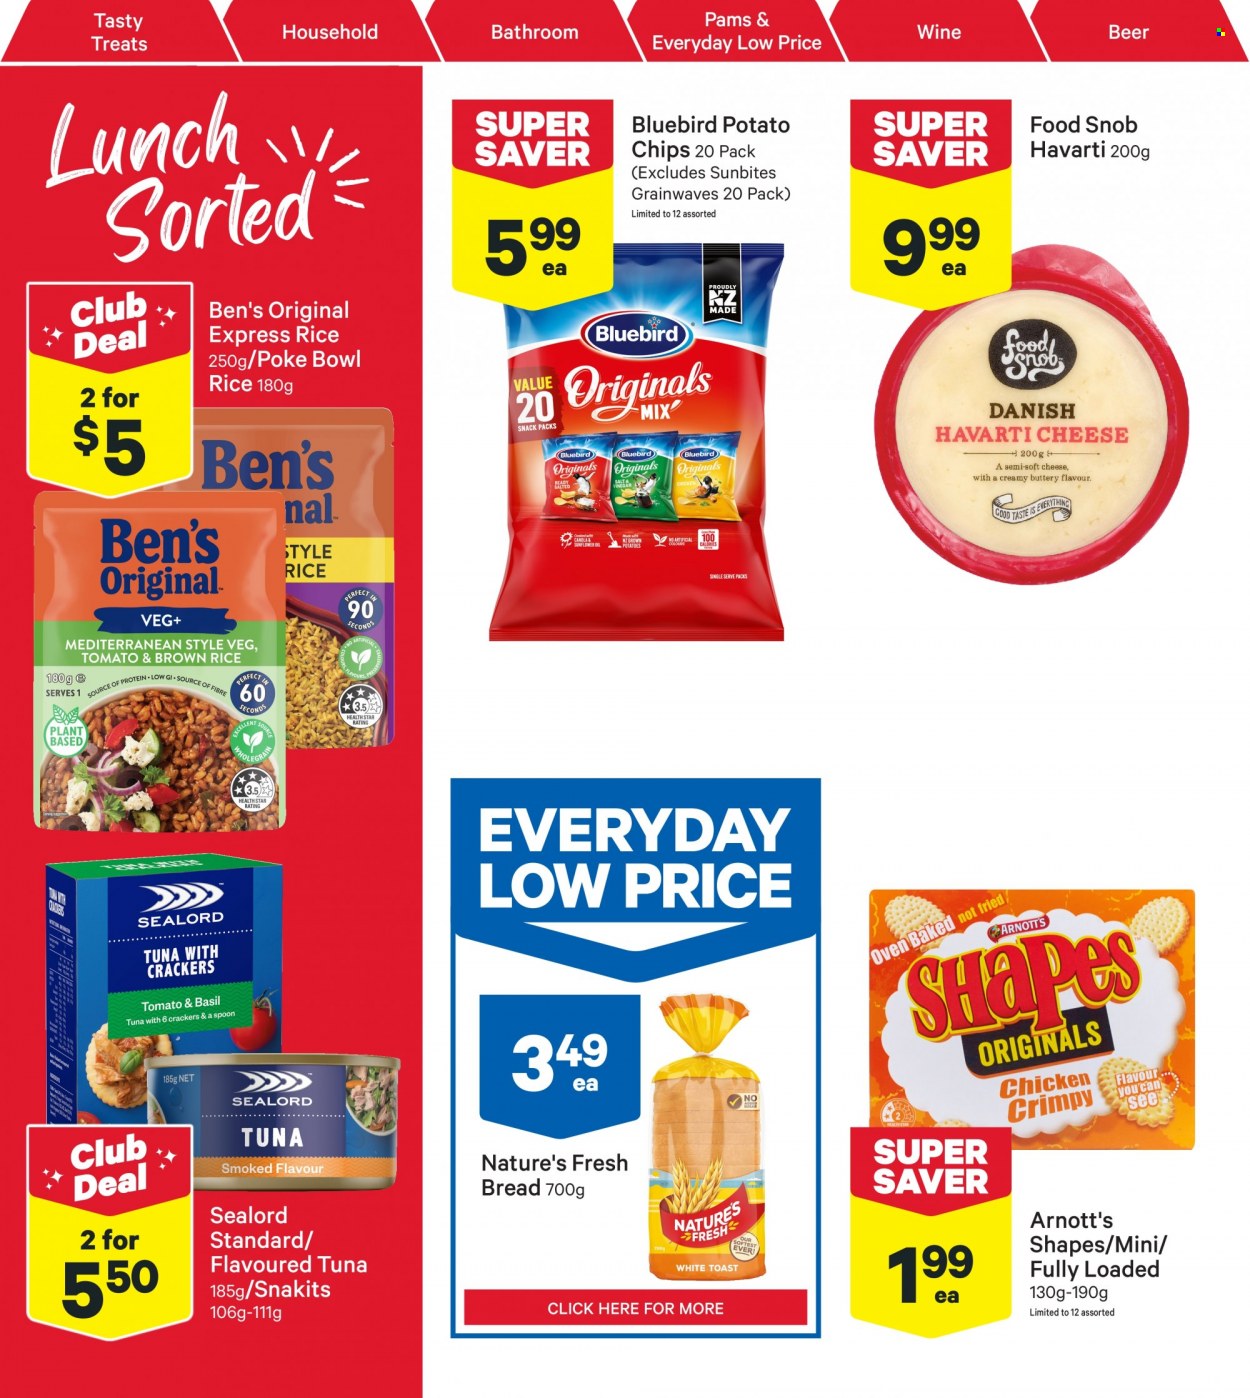 thumbnail - New World mailer - 06.02.2023 - 12.02.2023 - Sales products - bread, tuna, Sealord, soft cheese, Havarti, cheese, snack, crackers, potato chips, chips, Bluebird, Sunbites, sealord tuna, brown rice, rice, oil, wine, beer, spoon, bowl. Page 2.